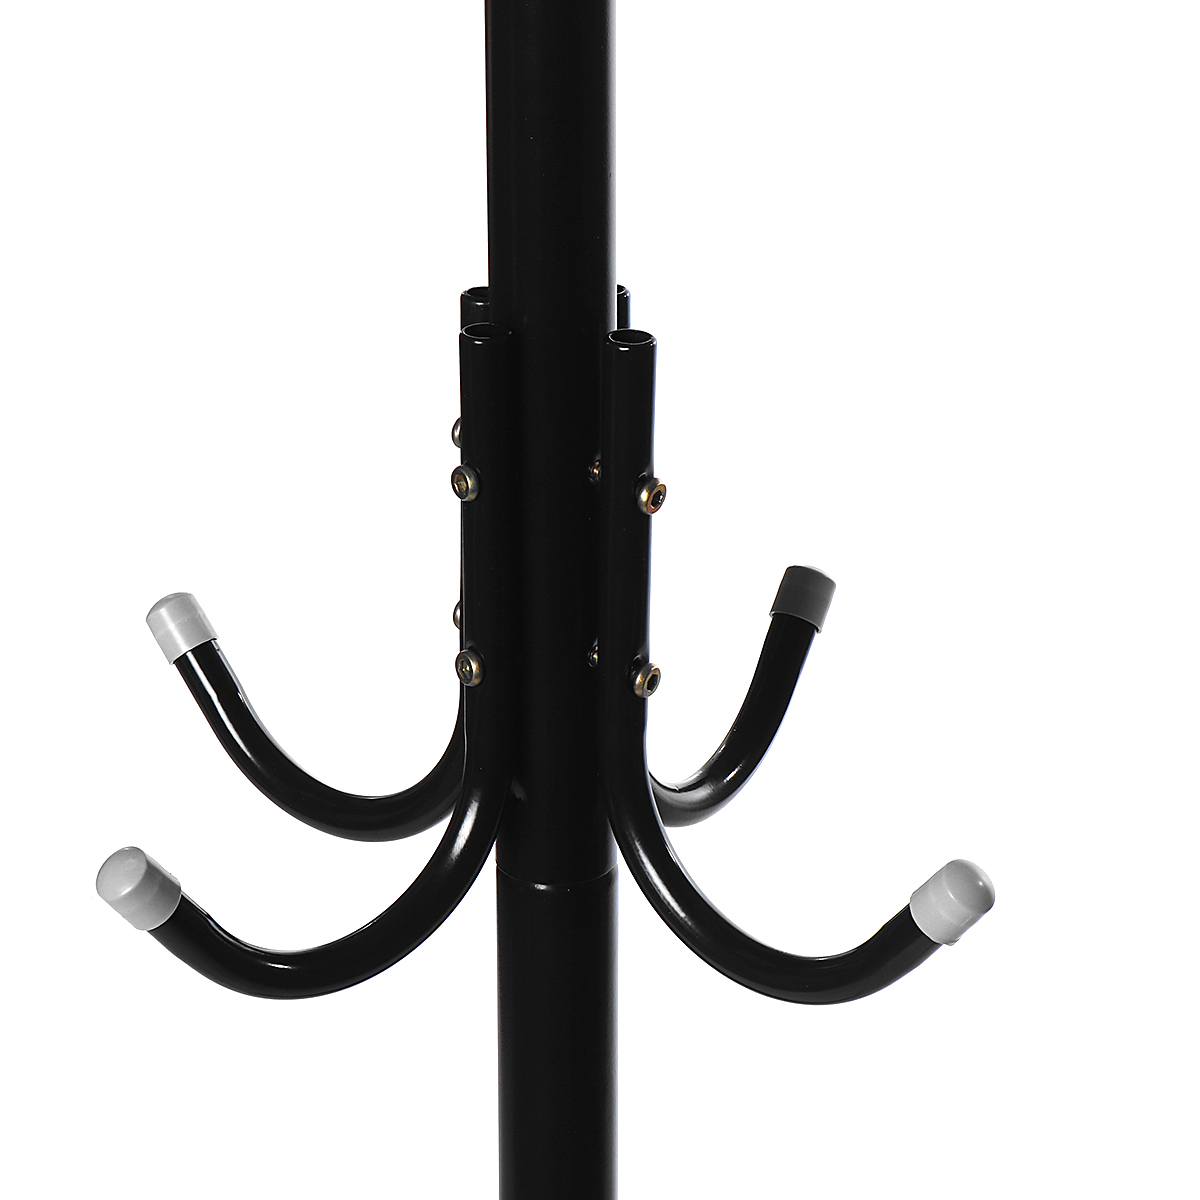 Find 12 Hooks Coat Rack Metal Clothes Hat Bags T-shirt Jacket Stand Hook Hanging Pole Floor Rack Tree Holder Organizer Hanger for Sale on Gipsybee.com with cryptocurrencies